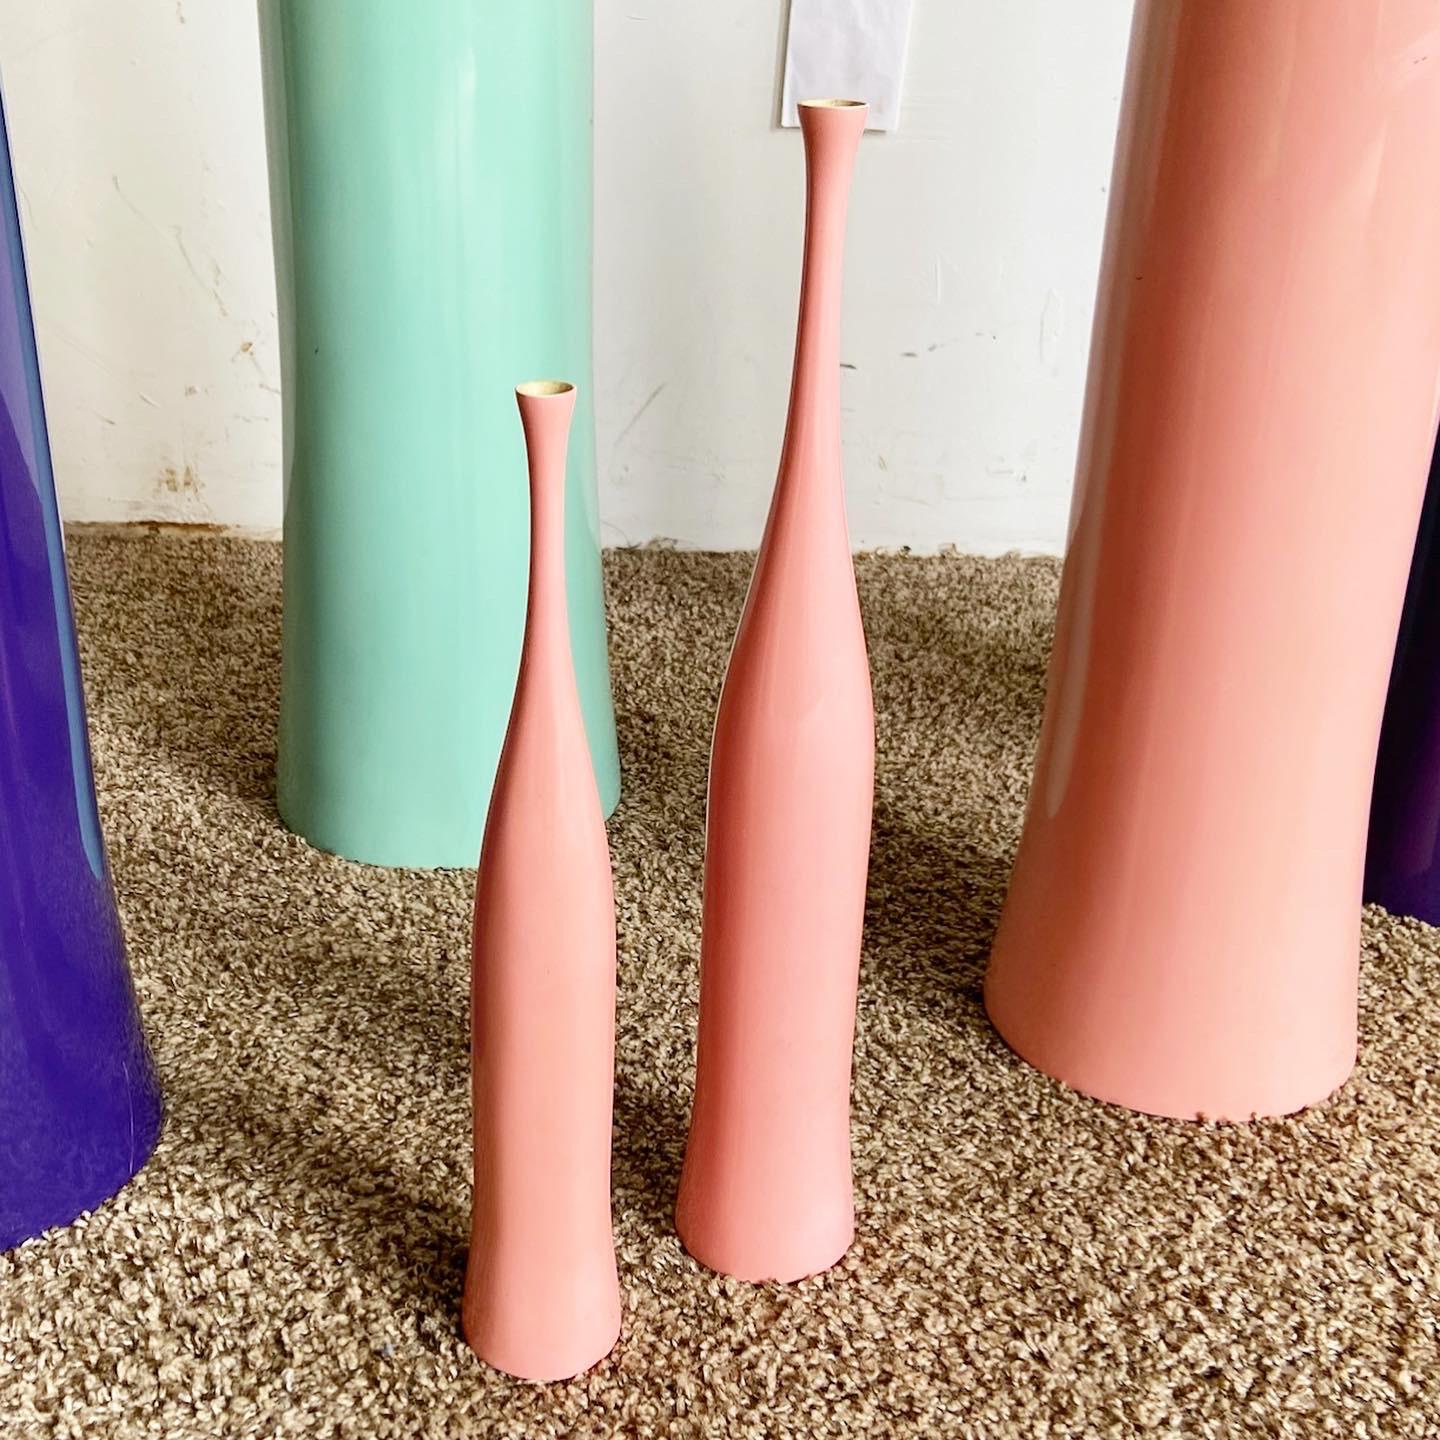 Post-Modern Postmodern Vases by Oggetti in Pink, Purple, and Teal - 6 Pieces For Sale